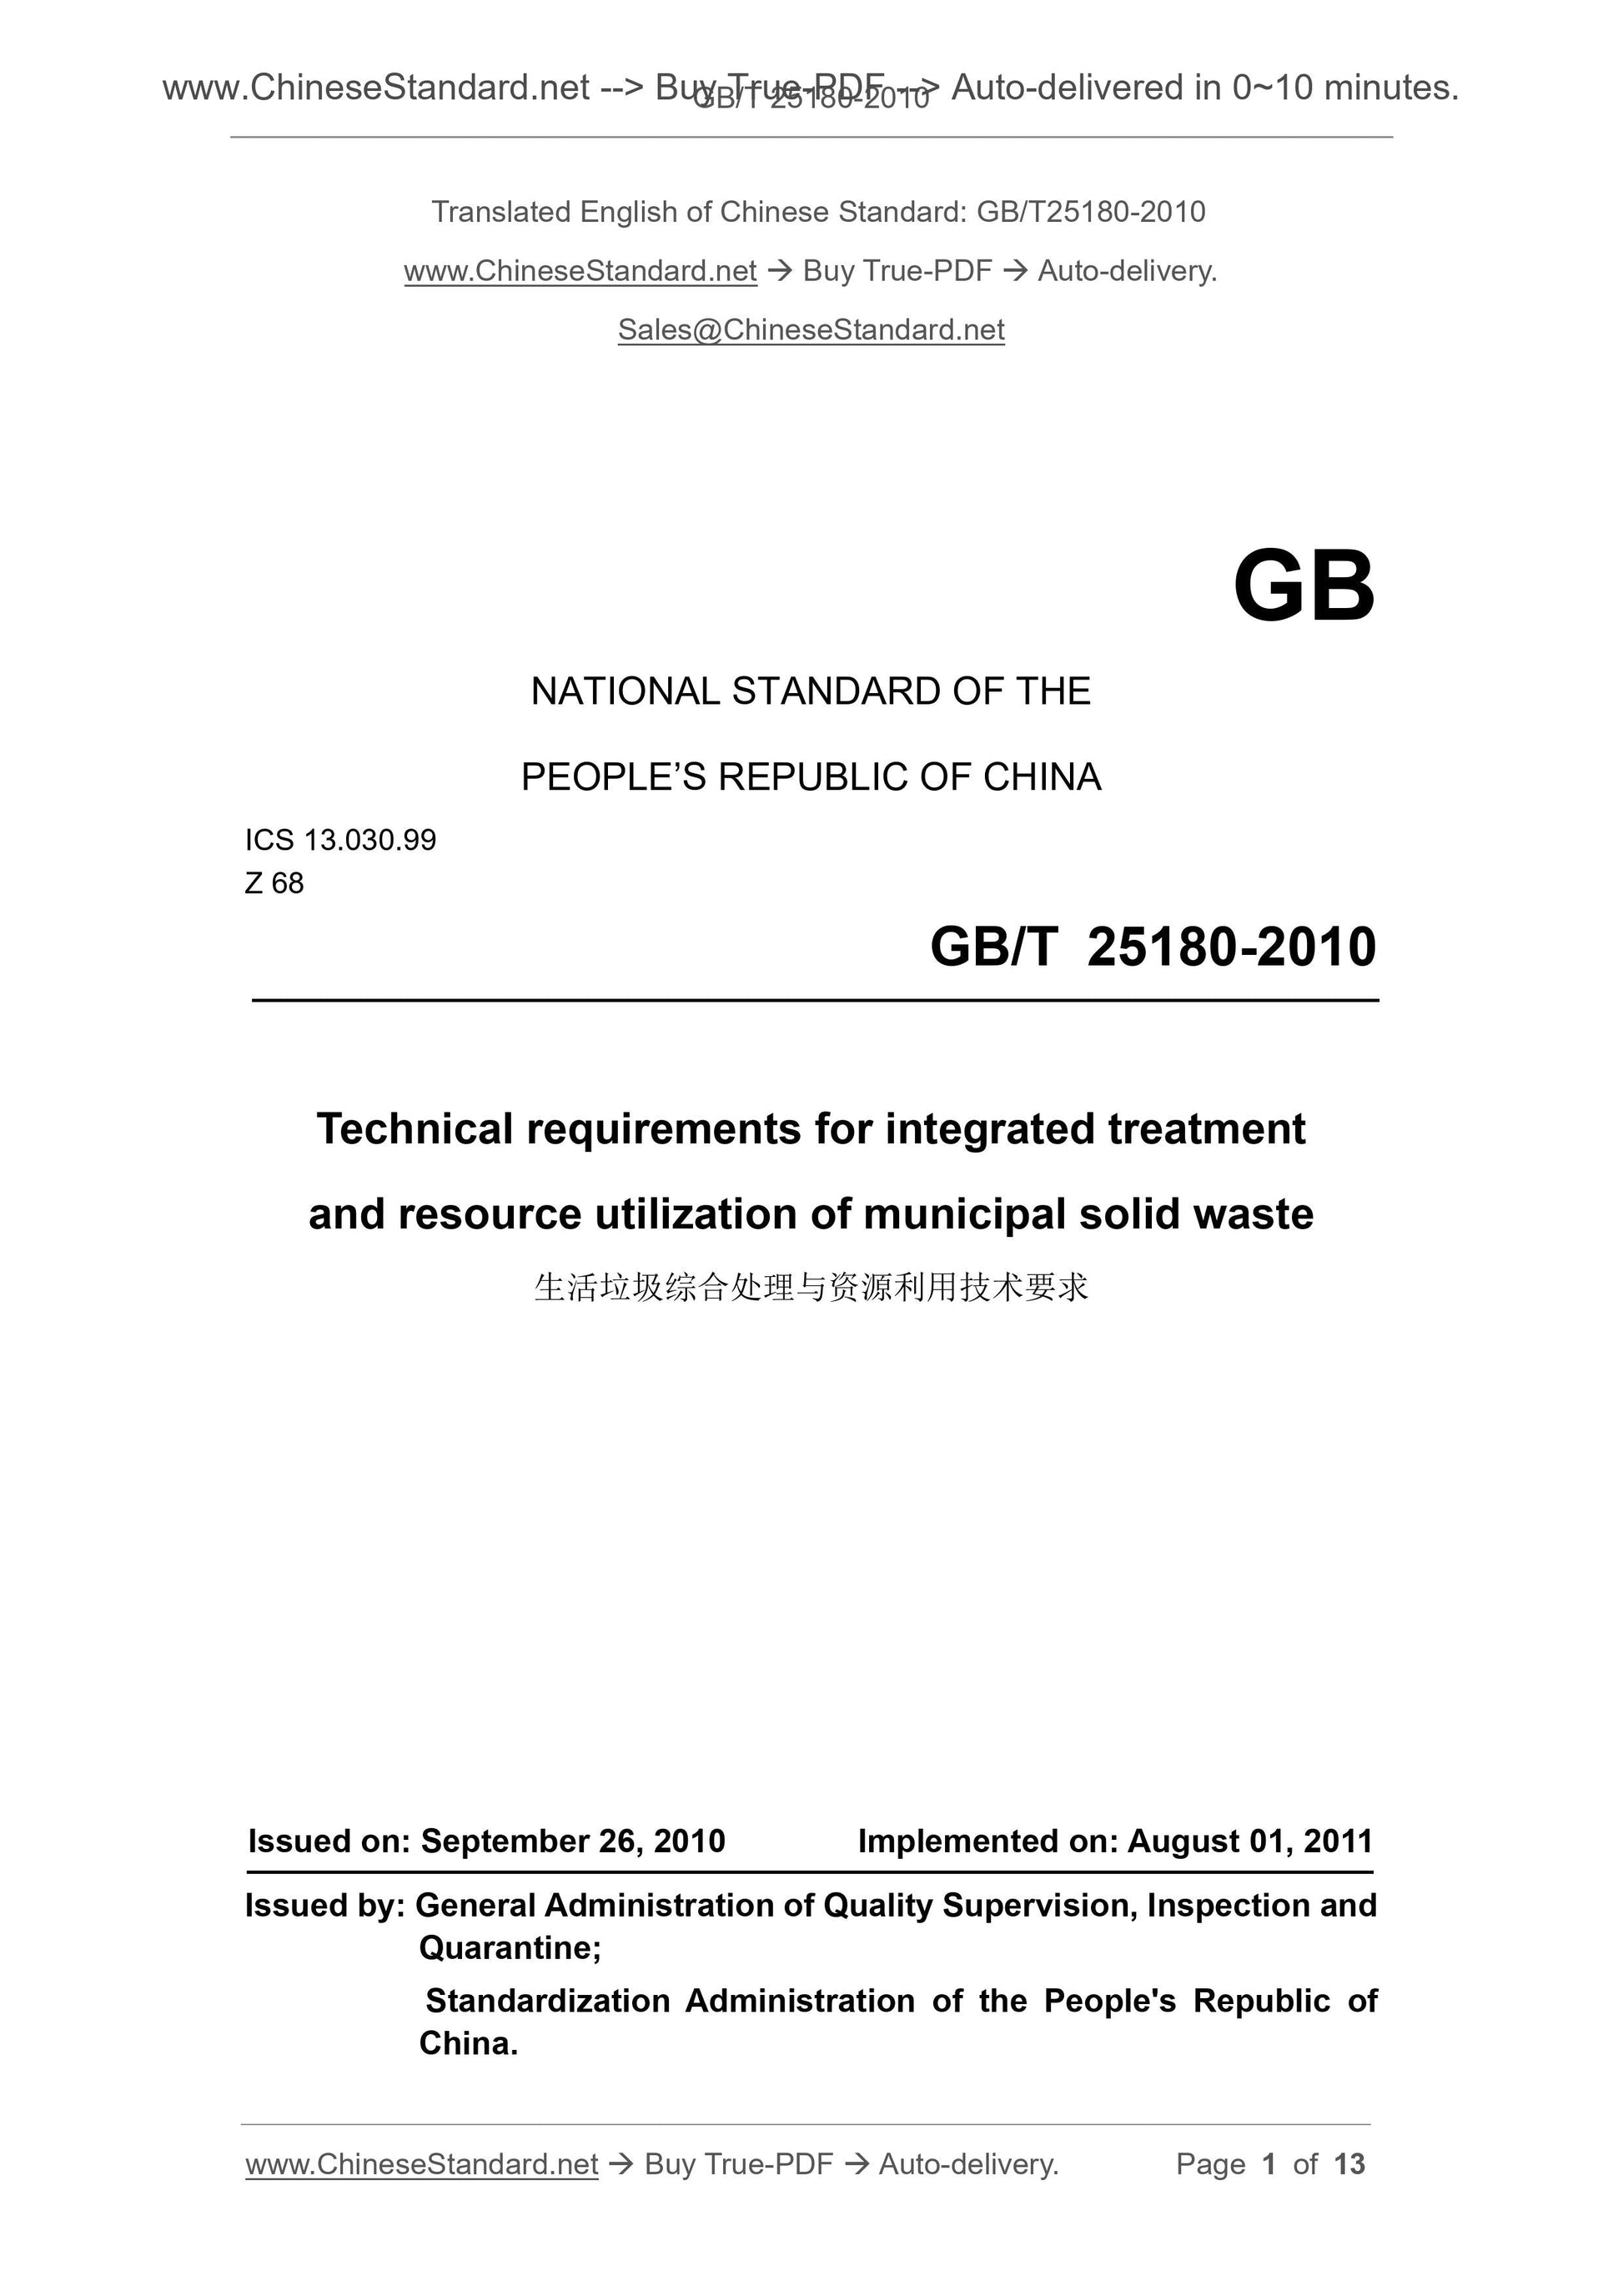 GB/T 25180-2010 Page 1